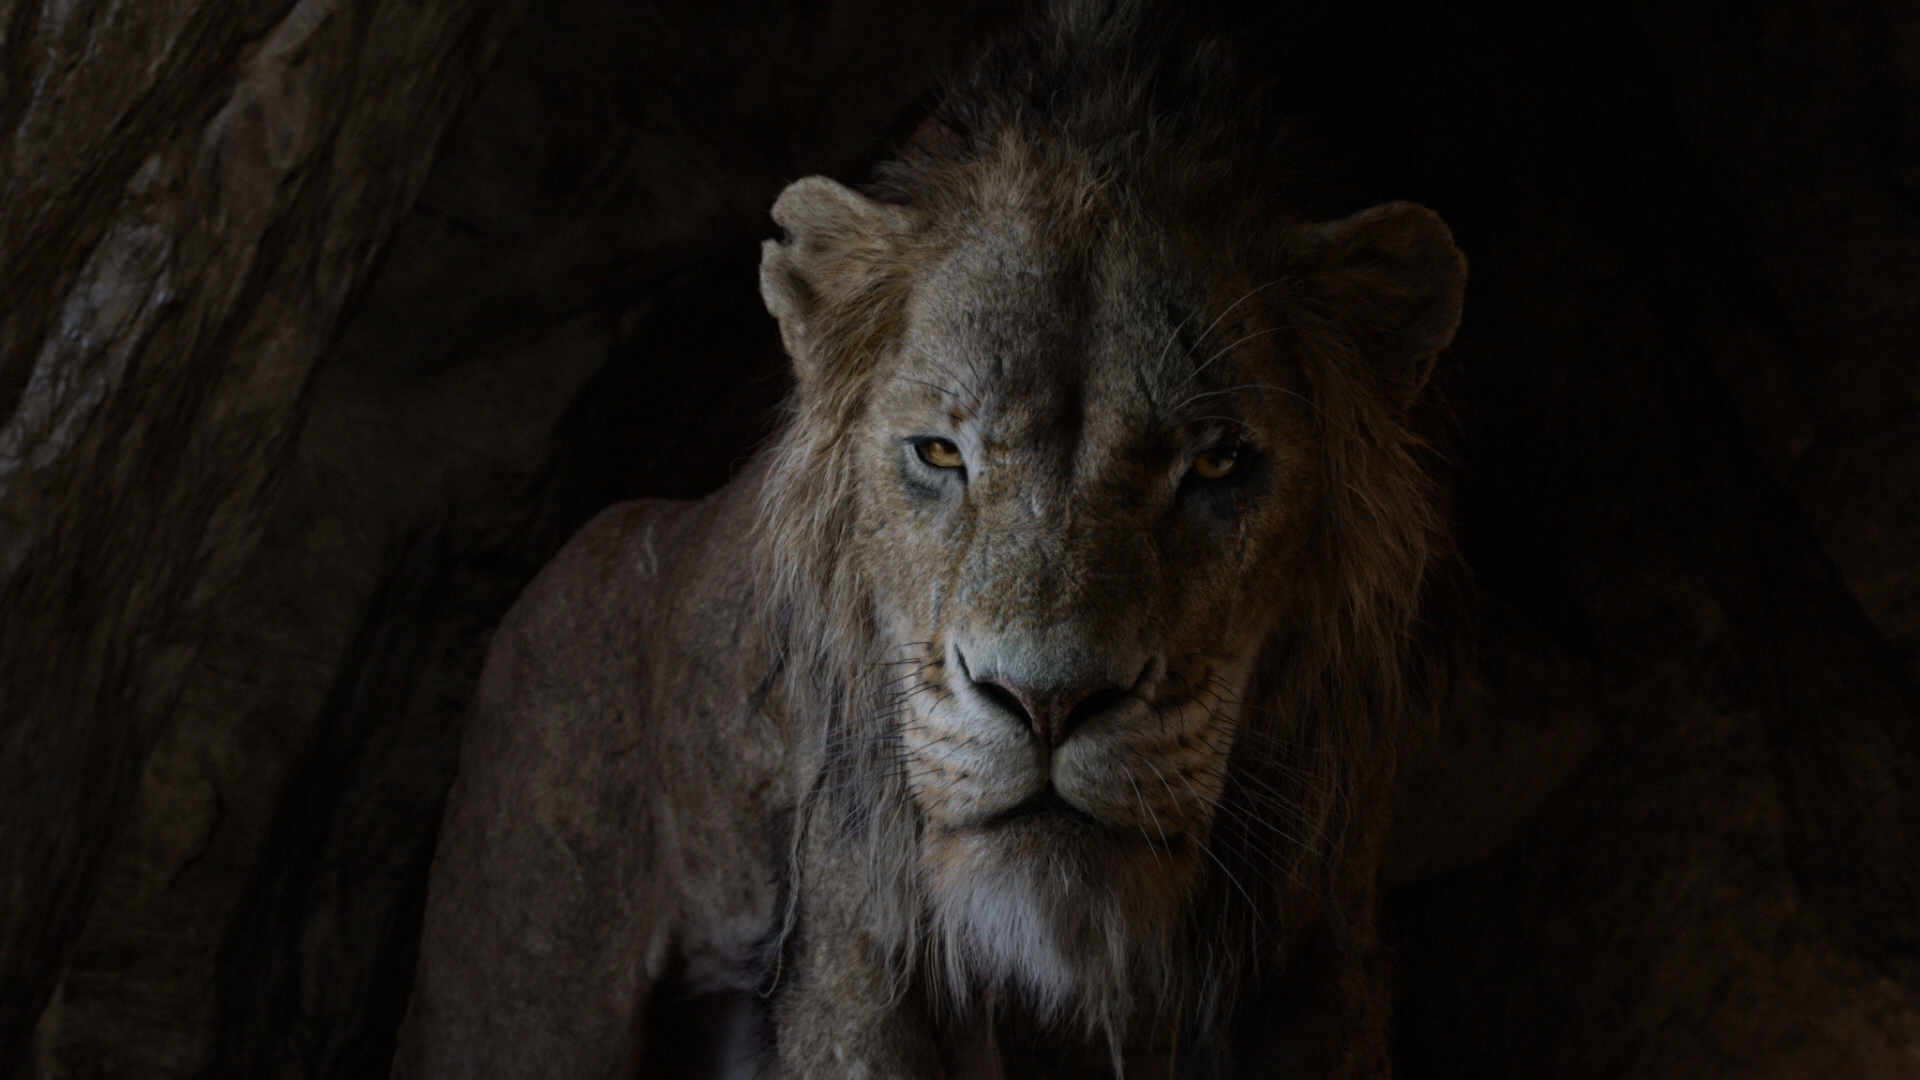 Watch A 'Real-Life Simba' Mount A Rock And Let Out An Epic Roar